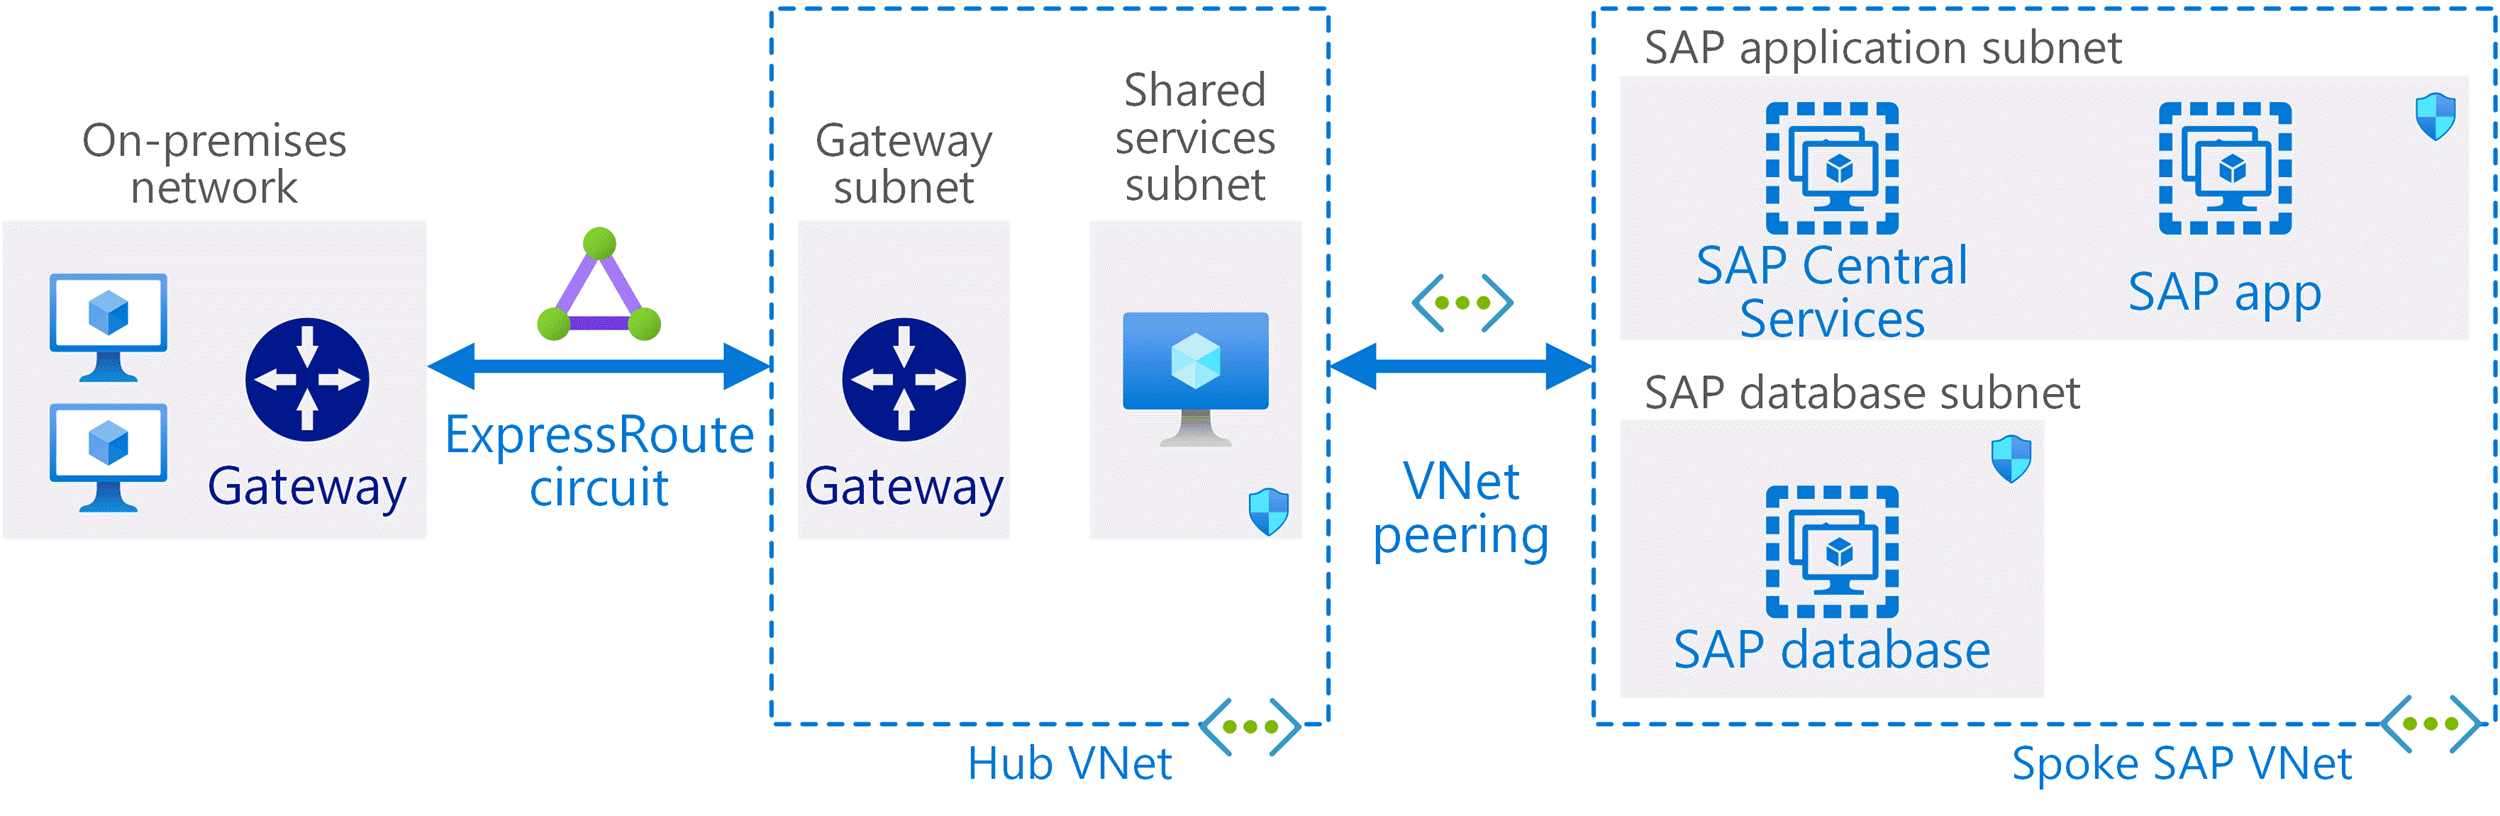 Infographic of SAP deployment on Azure using a hub-spoke network topology.